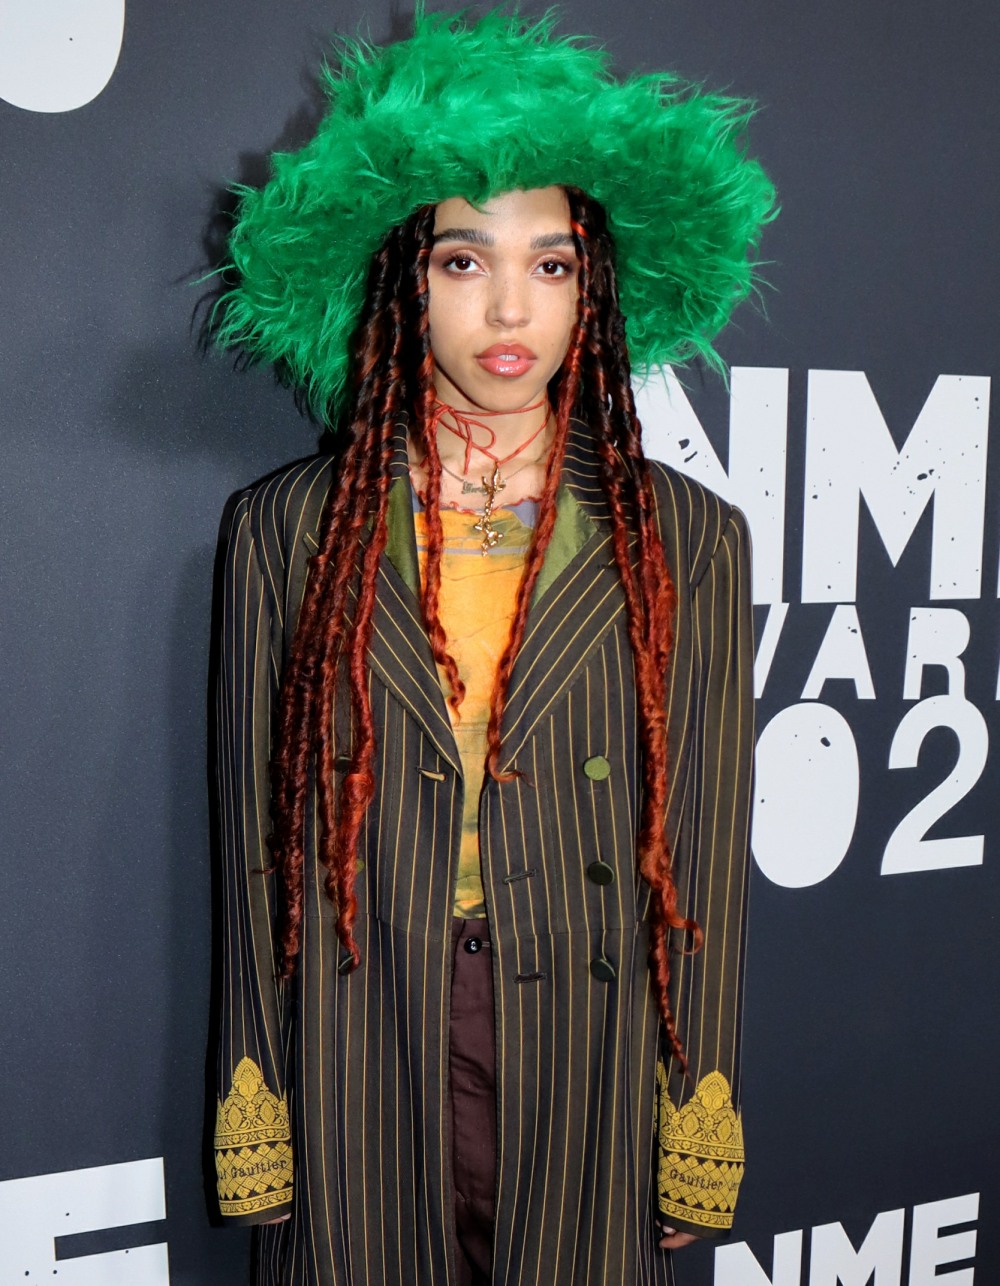 FKA Twigs attending the  NME Awards 2020 at the O2 Academy Brixton, London